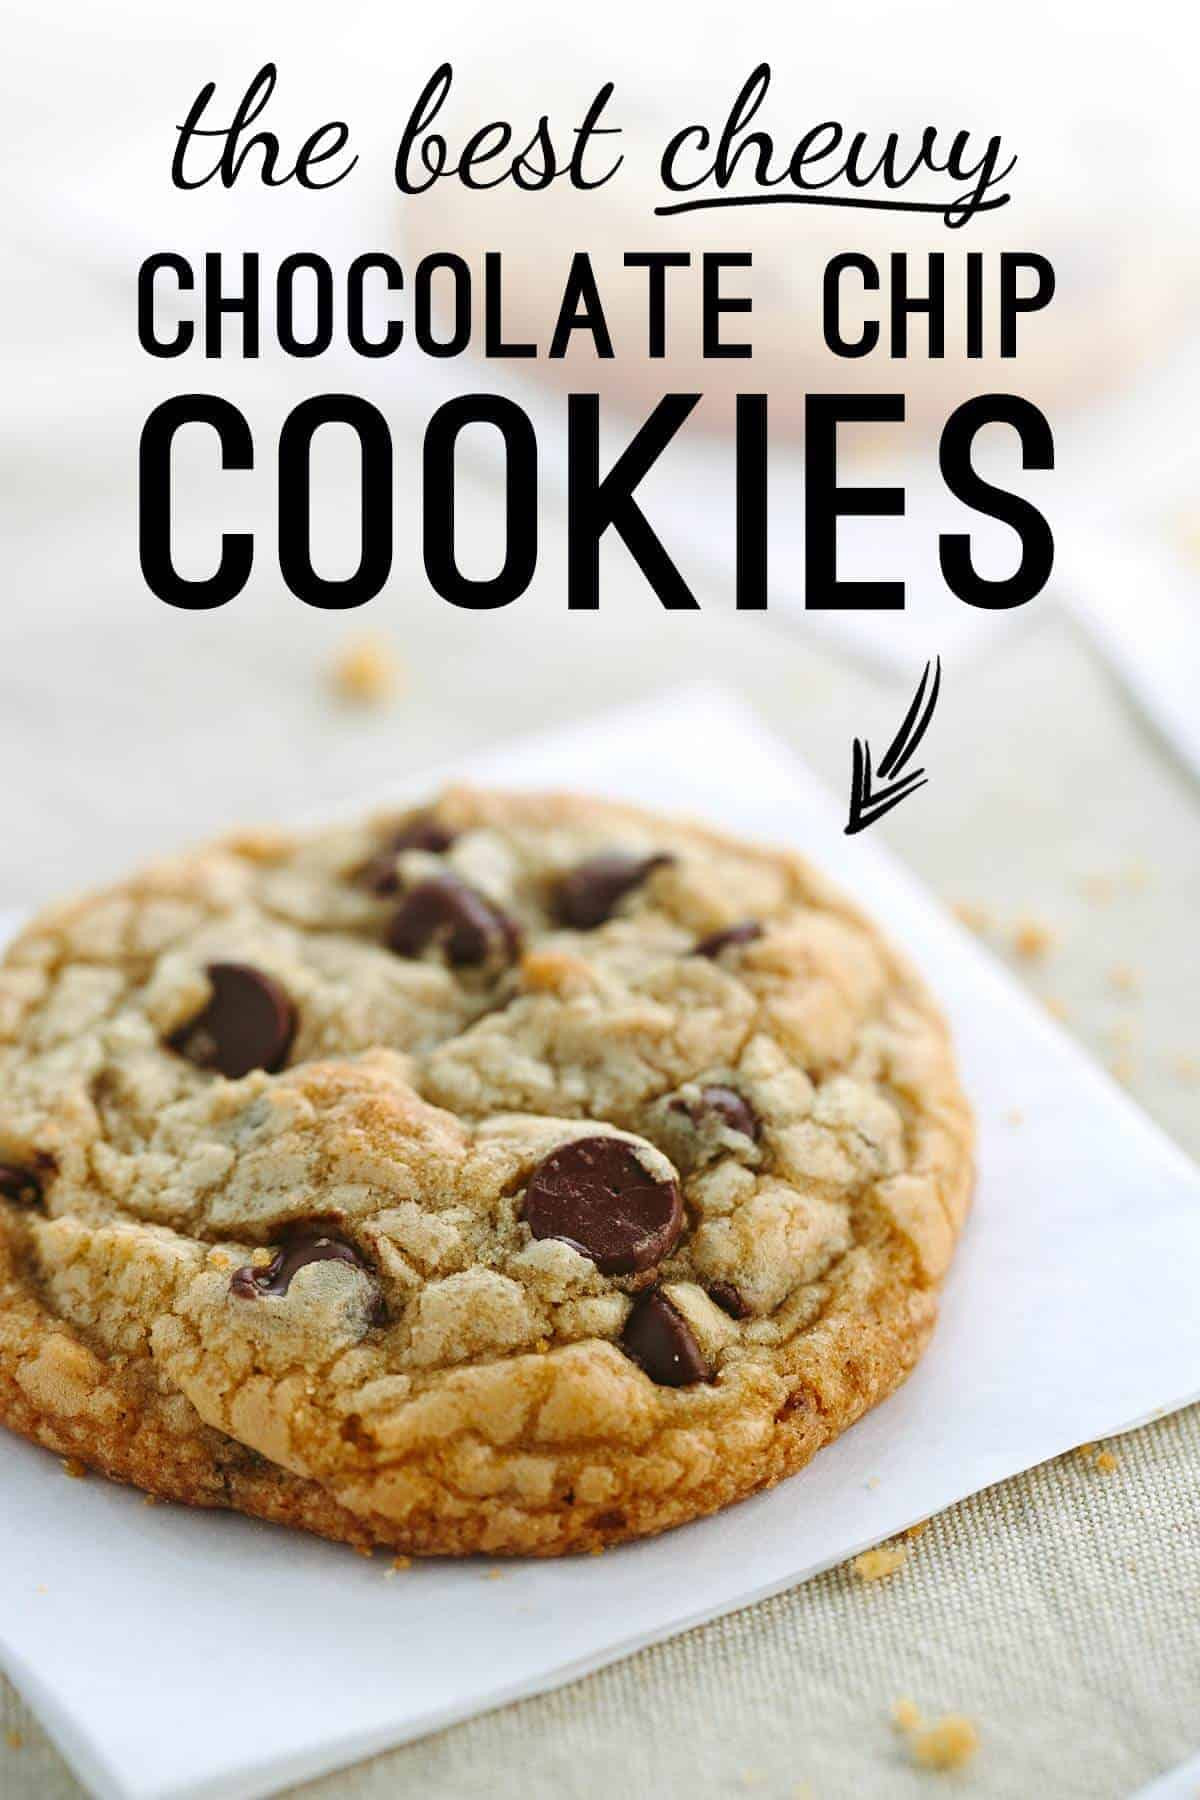 Soft Chewy Choc Chip Cookies Recipe
 The Best Chewy Chocolate Chip Cookies Jessica Gavin